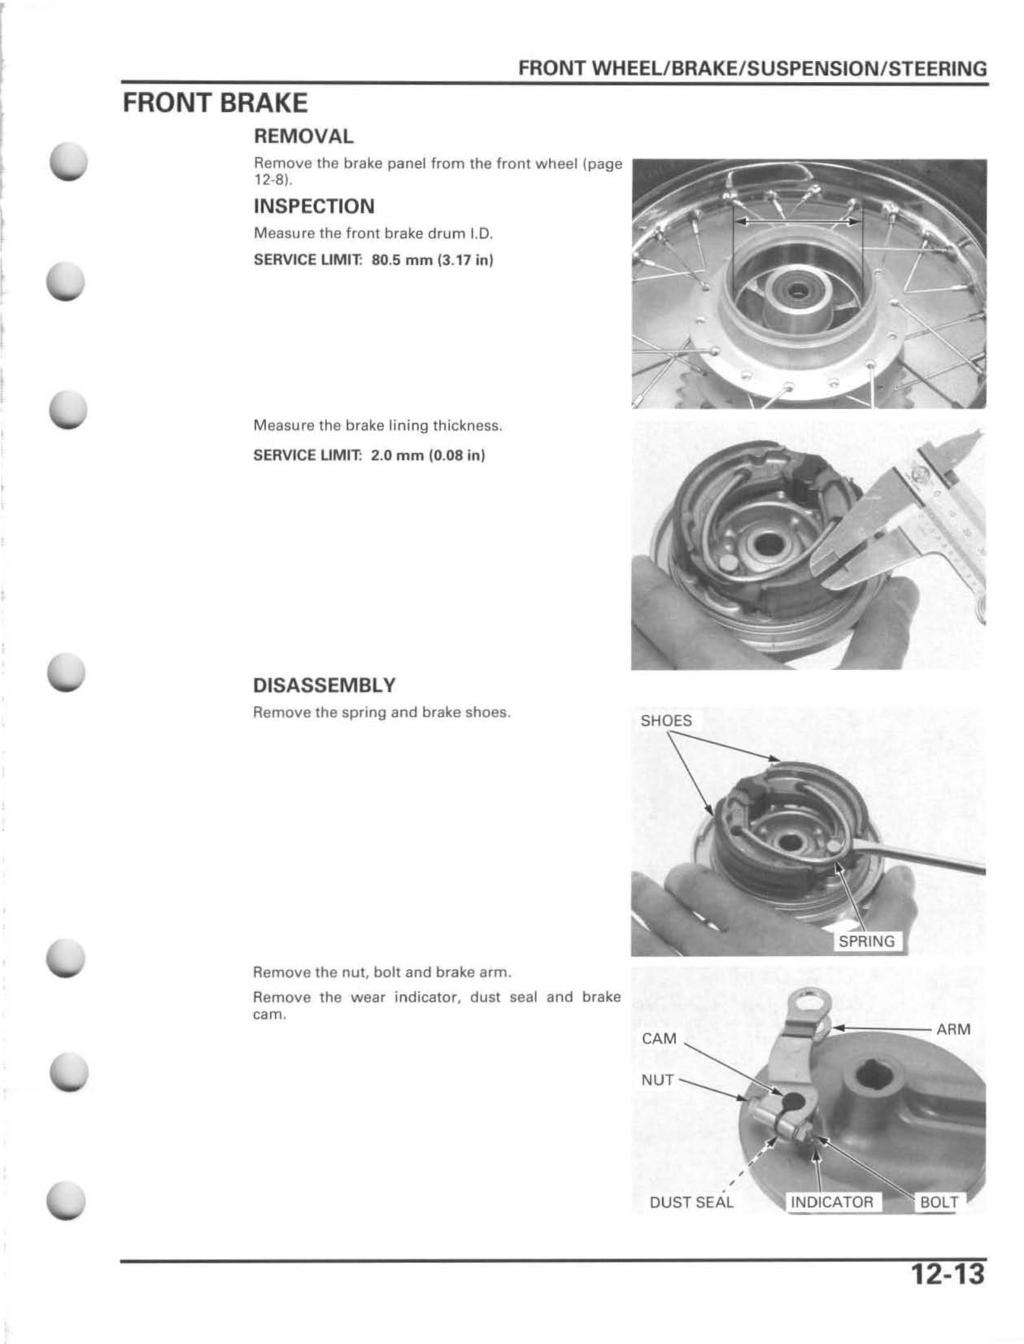 FRONT BRAKE REMOVAL Remove the brake panel from the front wheel (page 12-8), INSPECTION Measure the front brake drum I.D. SERVICE LIMIT: 80.5 mm (3.